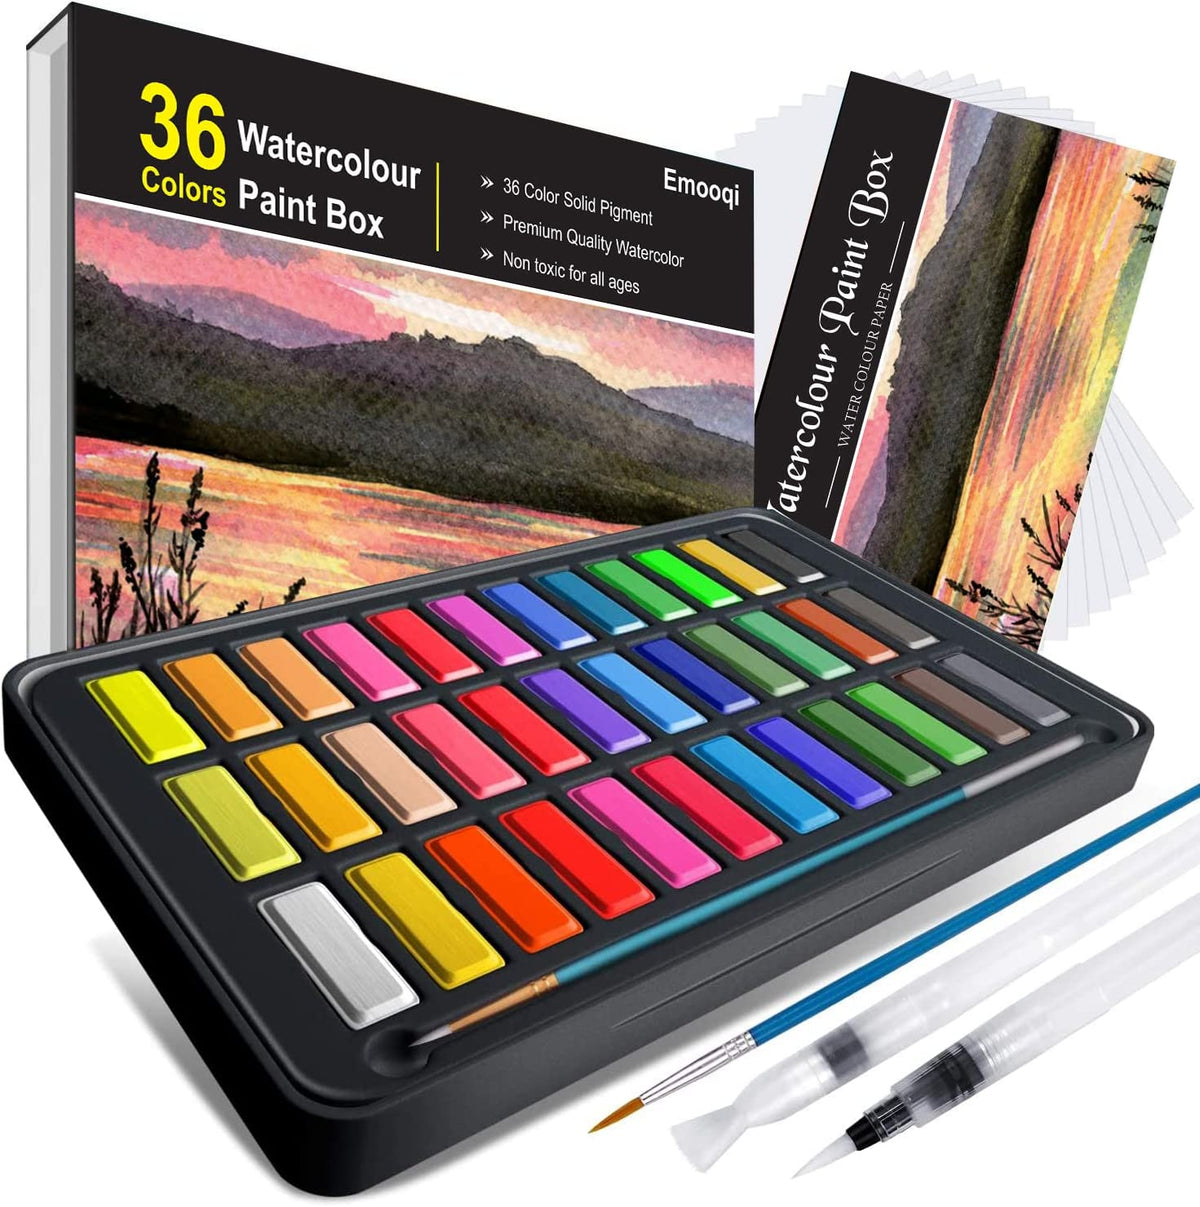 Emooqi Watercolor Paint Set, 48 Colors with 6 Metallic Colors,Hook Line  Pens,Water Brushes and Water Color Papers for Artists and Beginners,Art